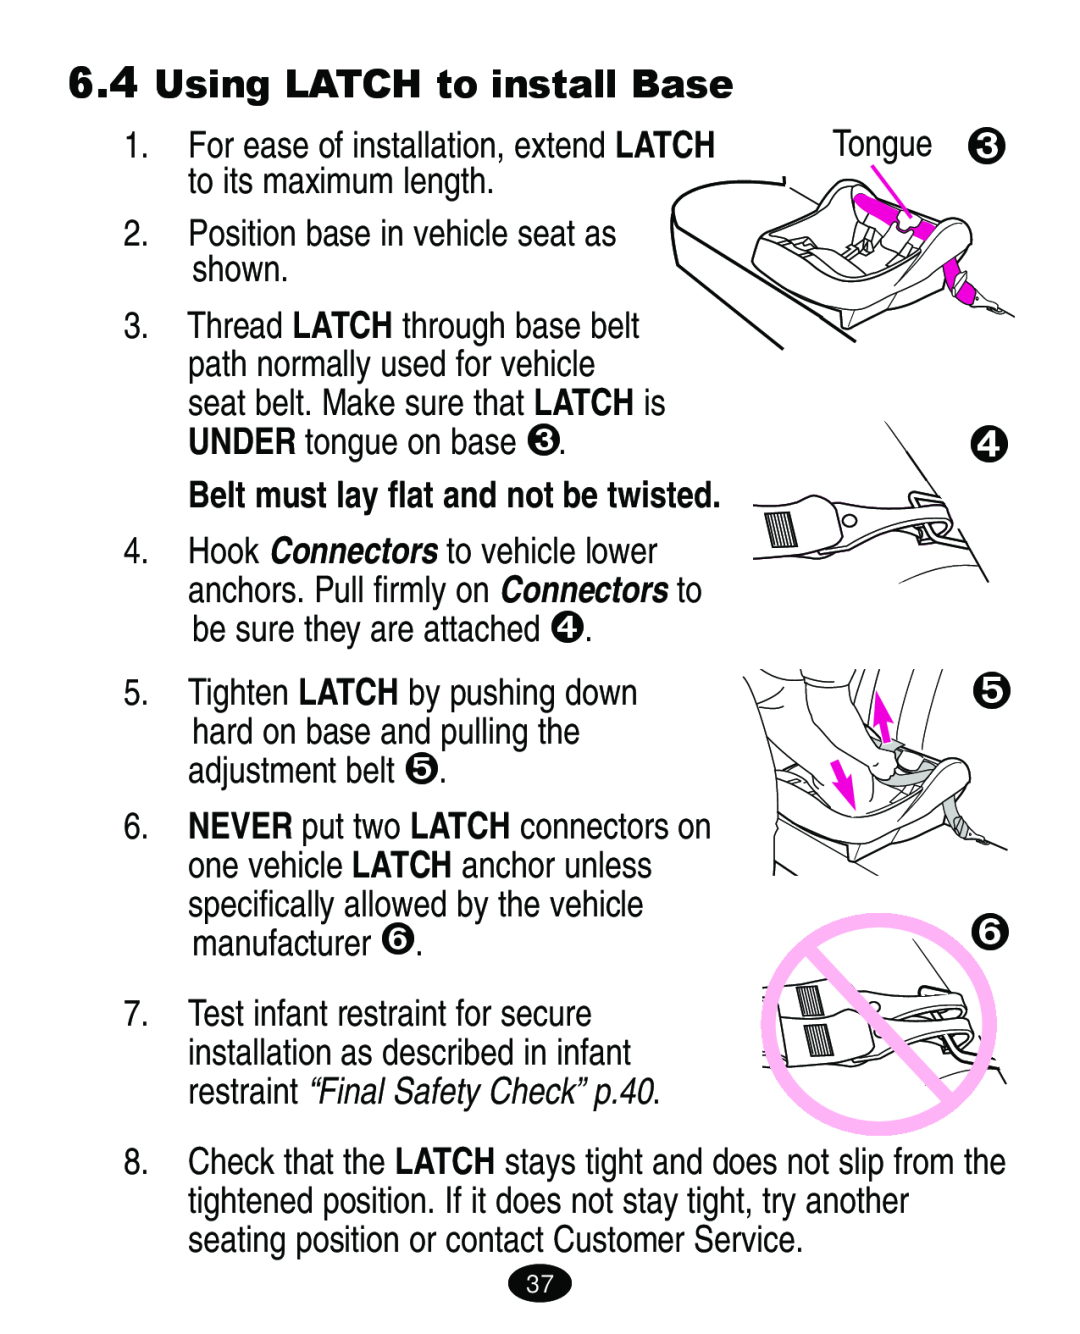 Graco ISPA109AC manual Using LATCH to install Base, restraint “Final Safety Check” p.40 